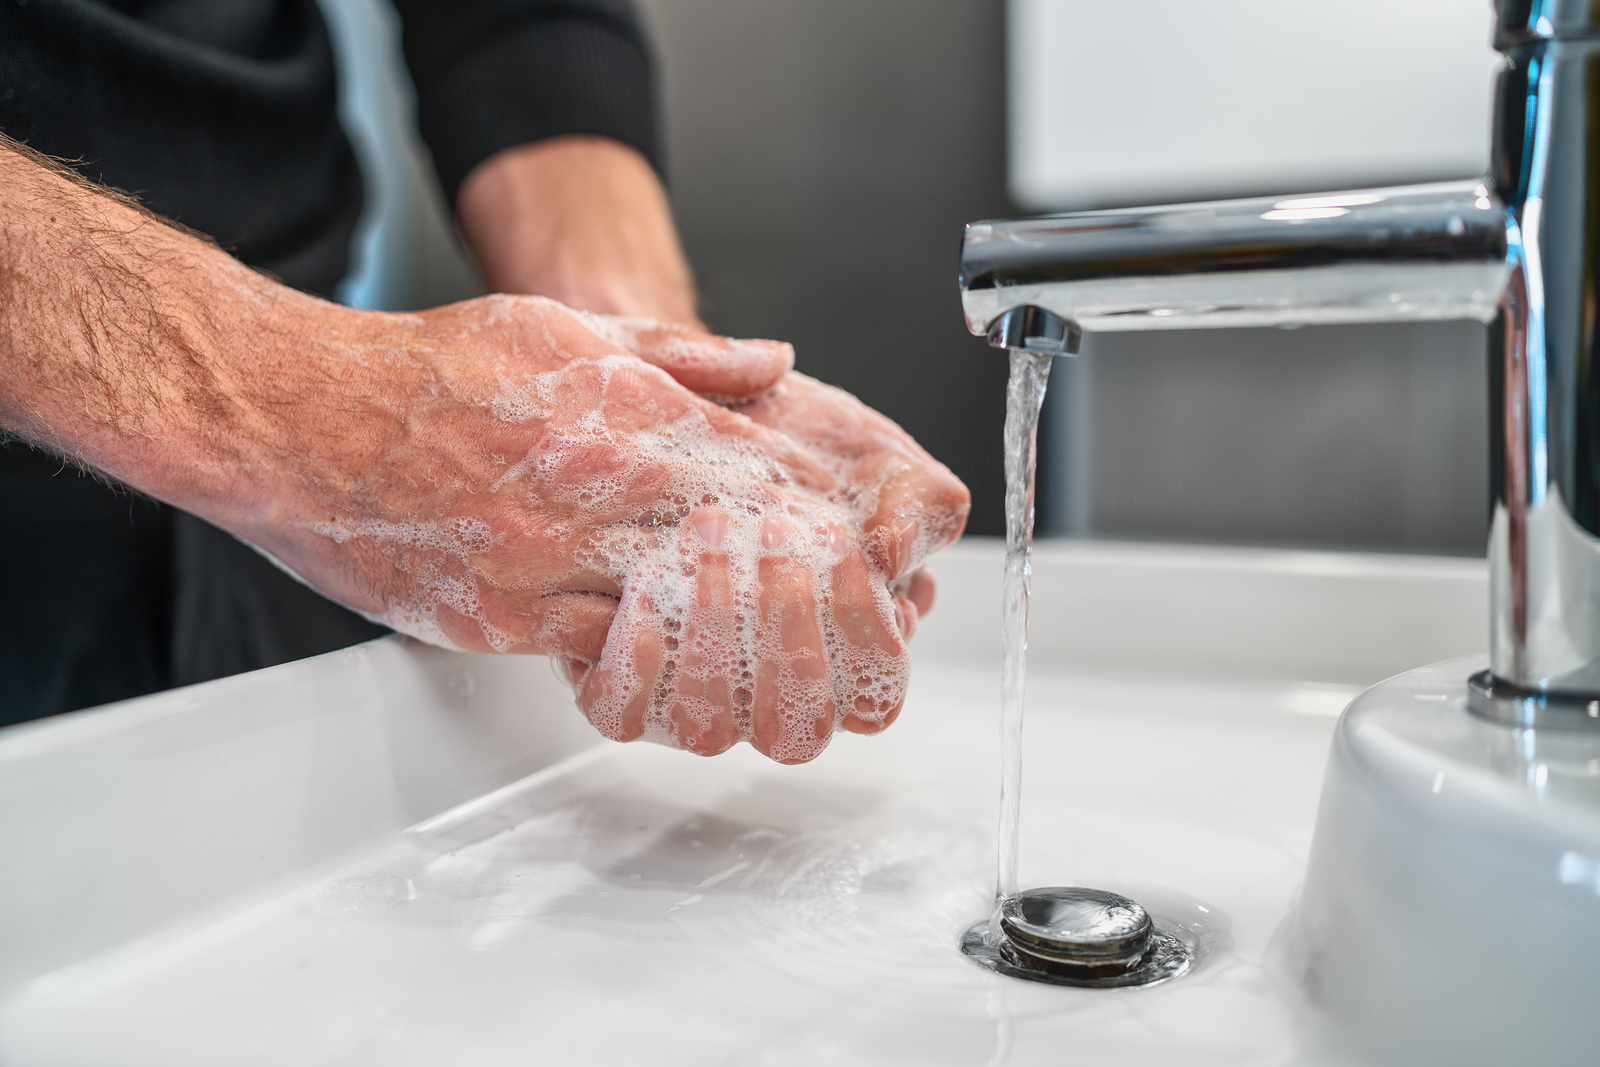 person washing their hands with soap and water in a sink